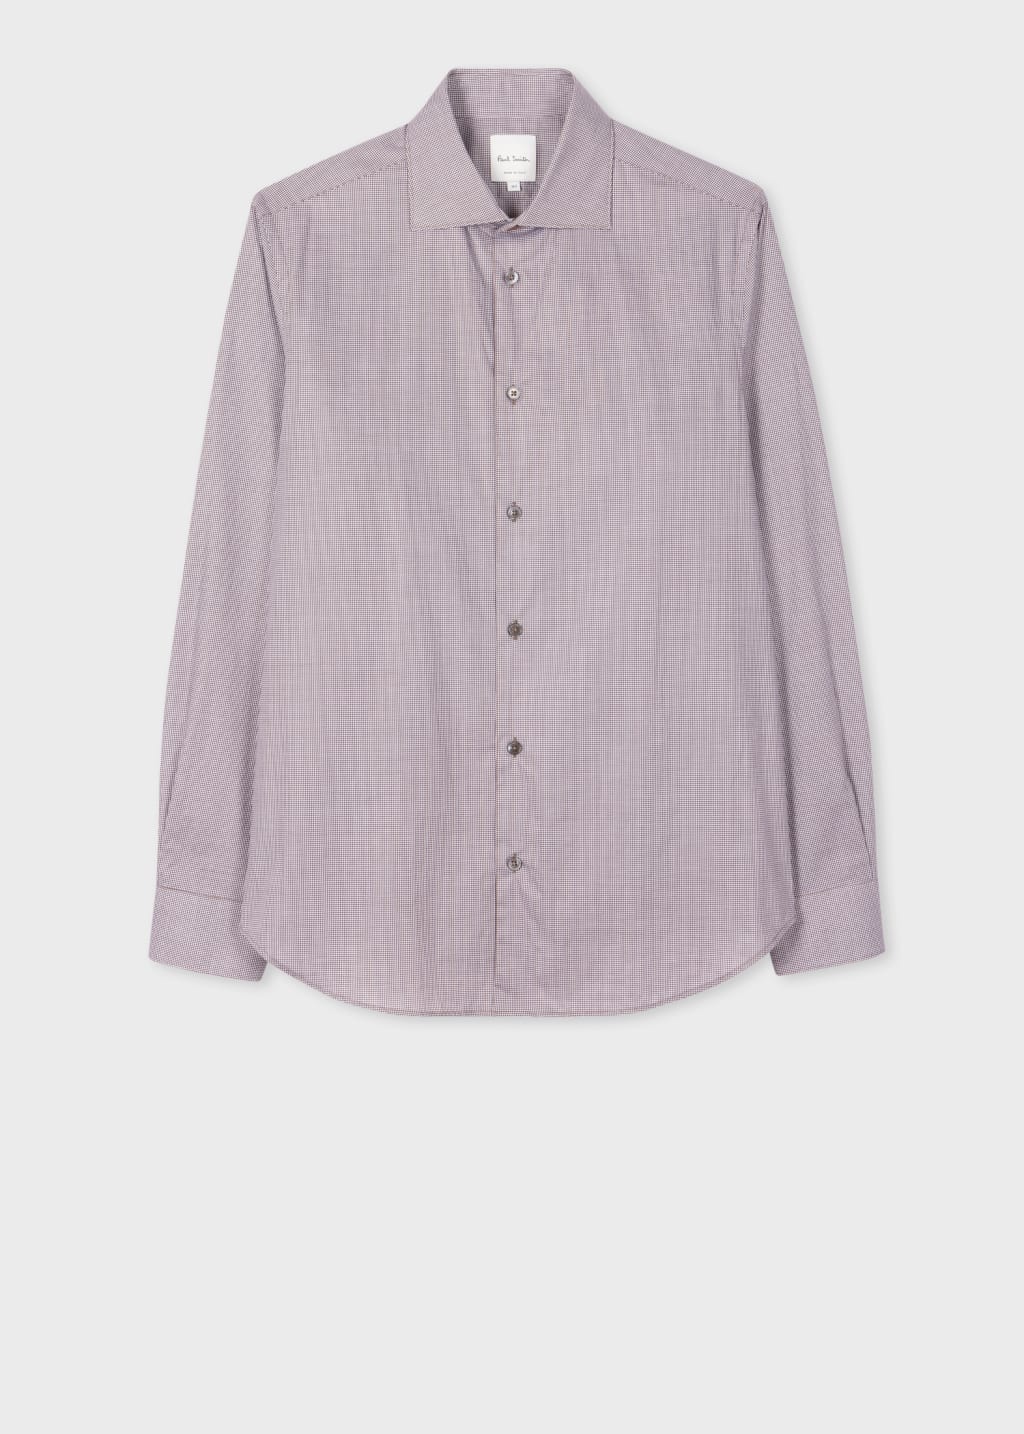 Product View - Men's Slim-Fit Brown Mini Gingham Shirt by Paul Smith